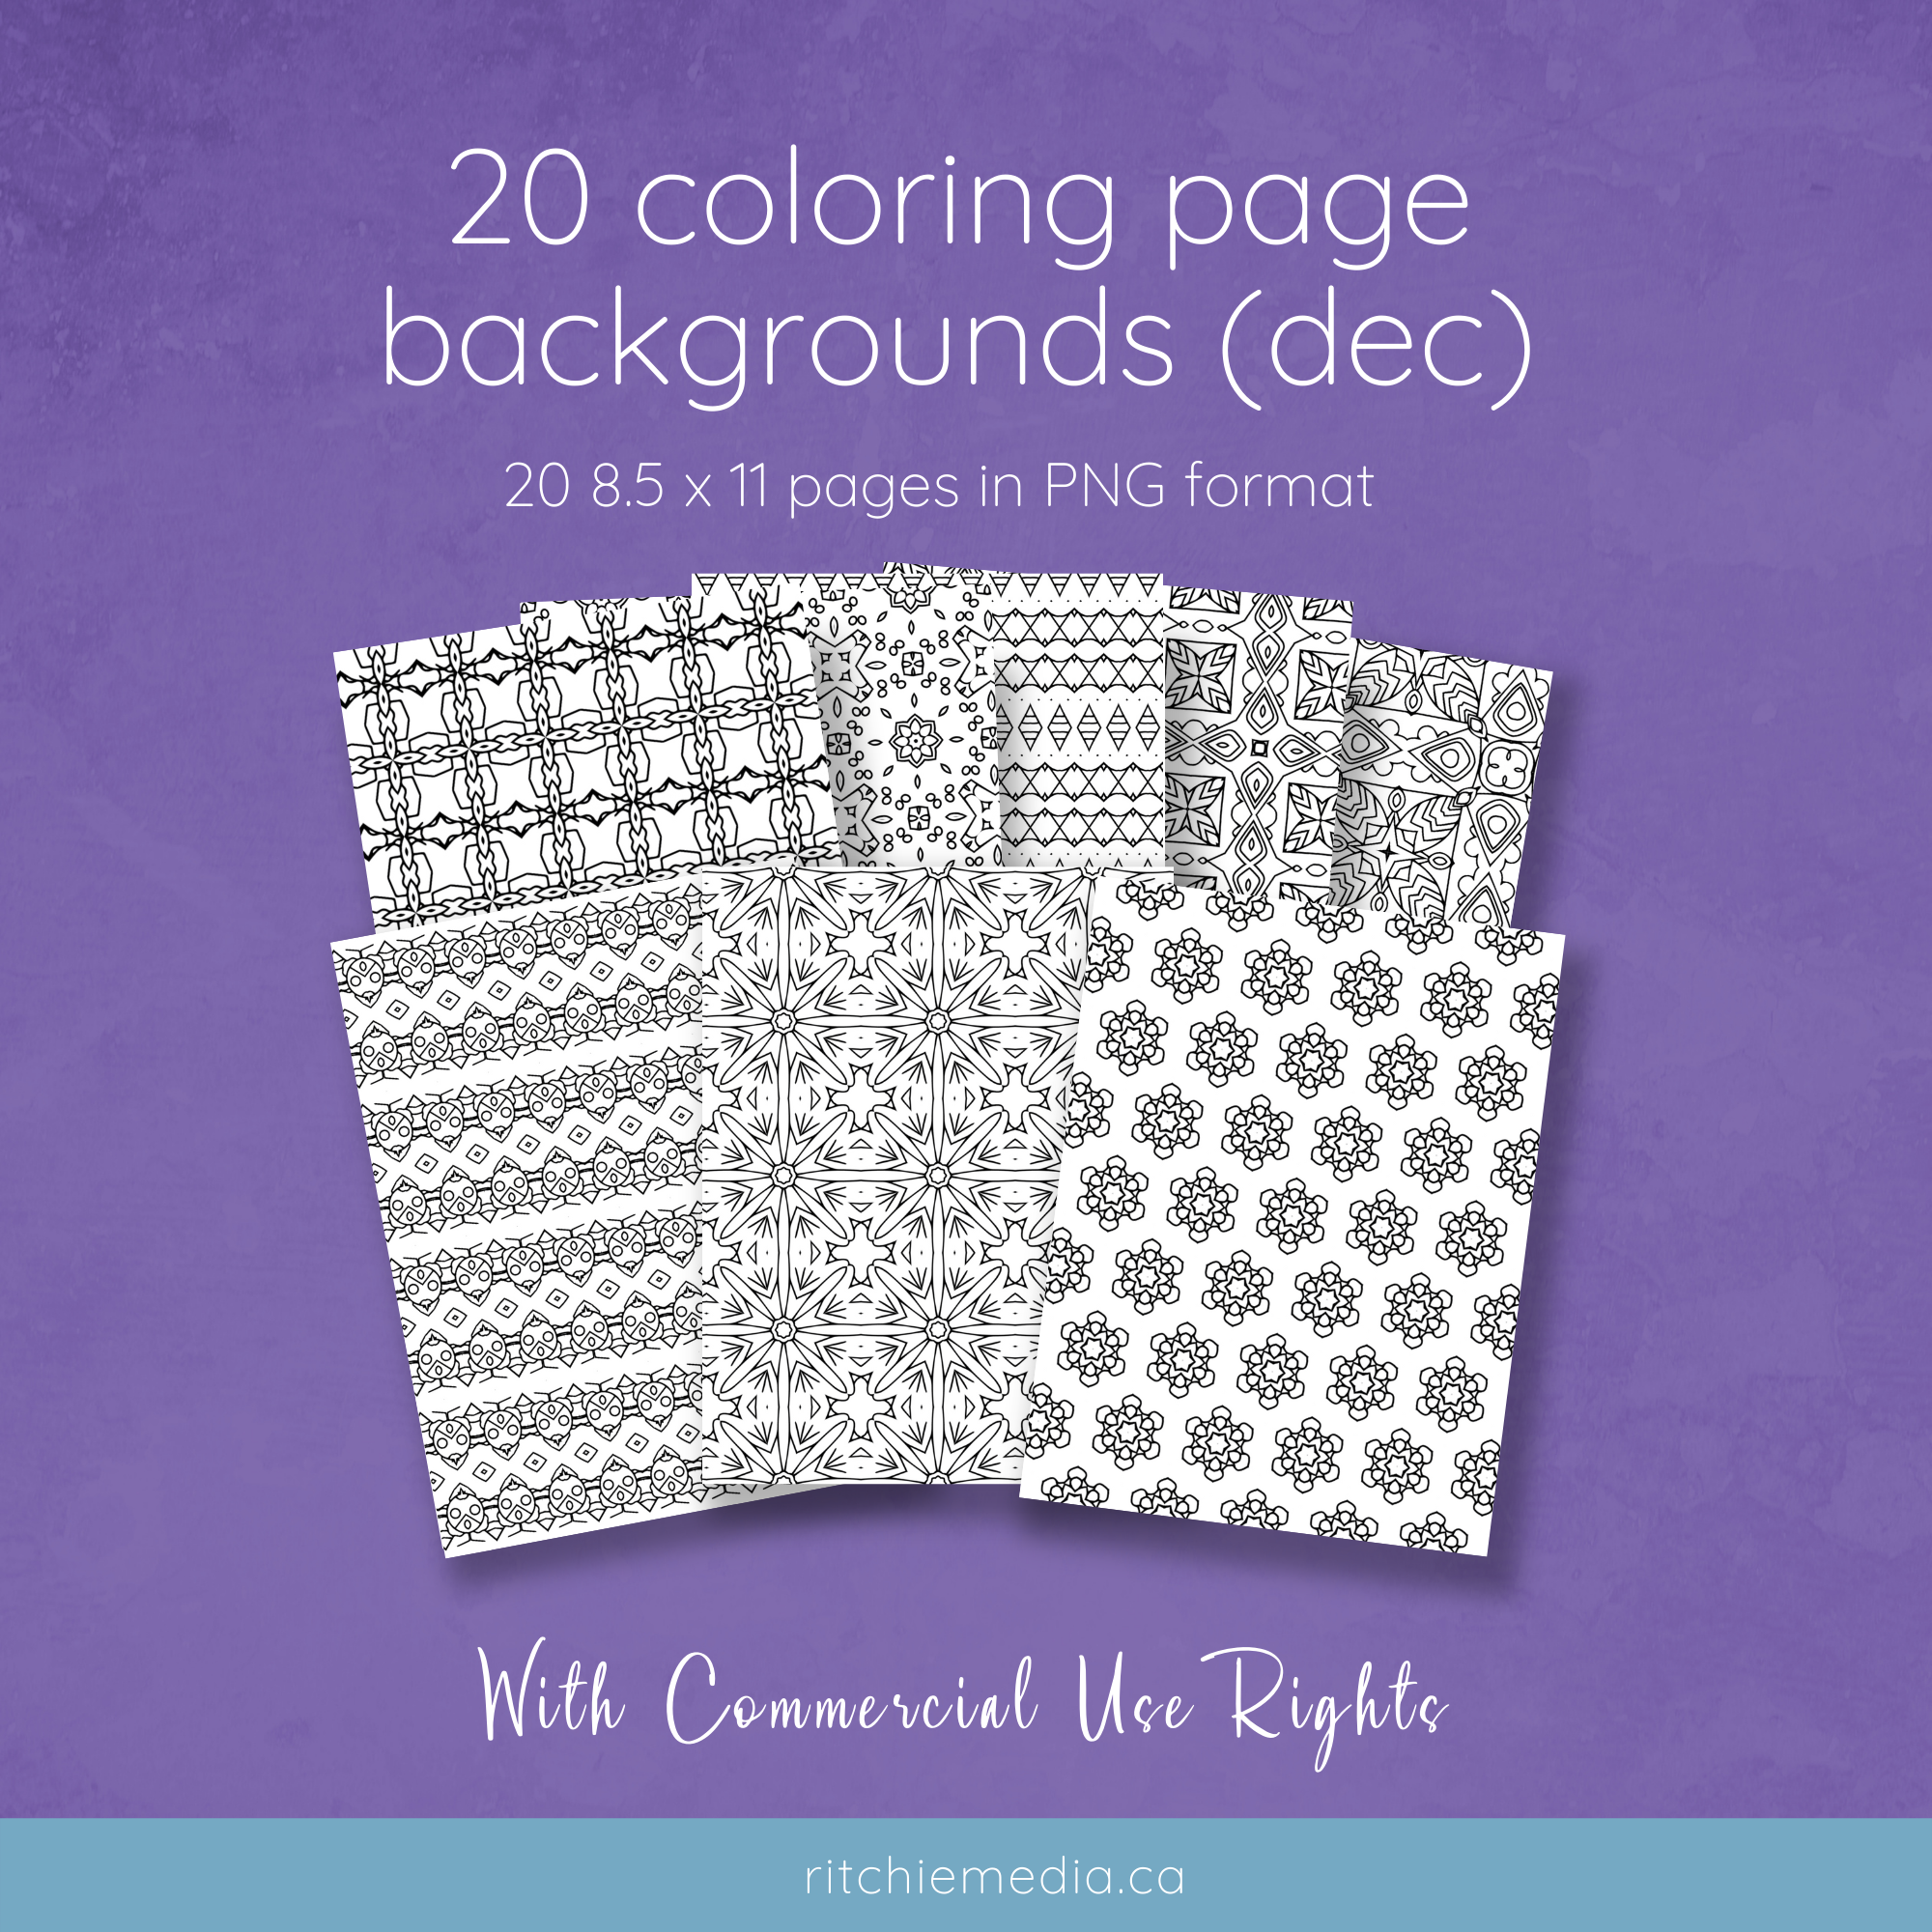 20 full coloring page backgrounds mockup